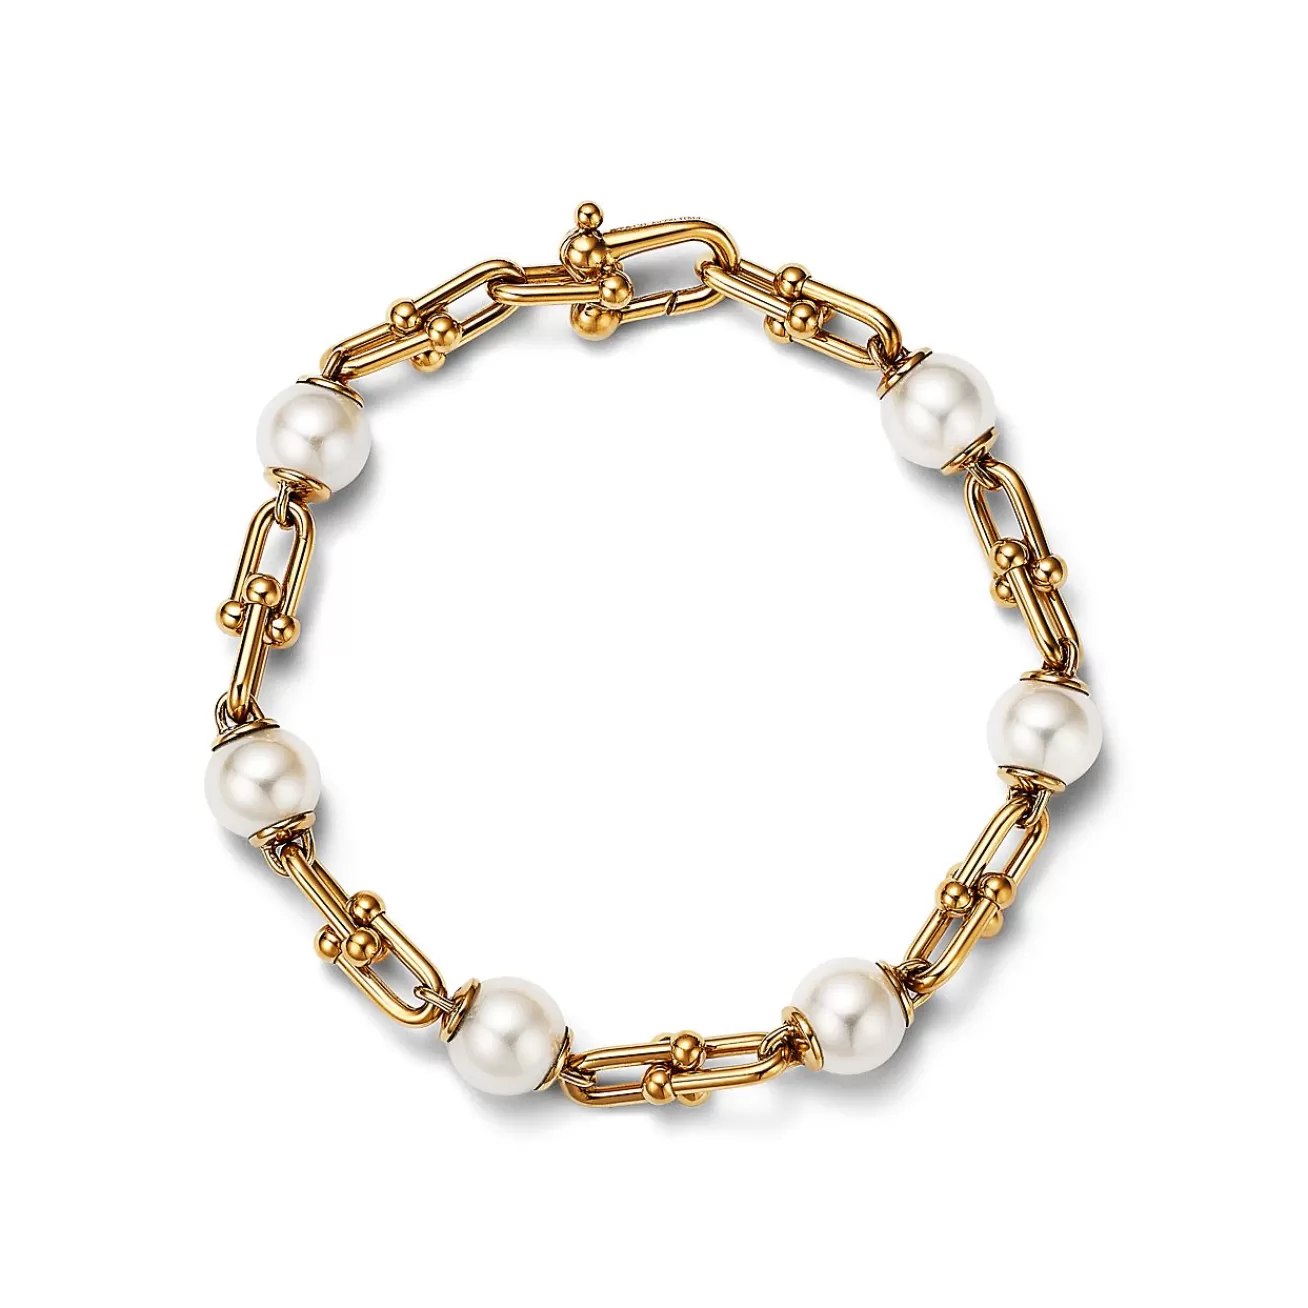 Tiffany & Co. Tiffany HardWear Link Bracelet in Yellow Gold with Freshwater Pearls | ^ Bracelets | Gifts for Her